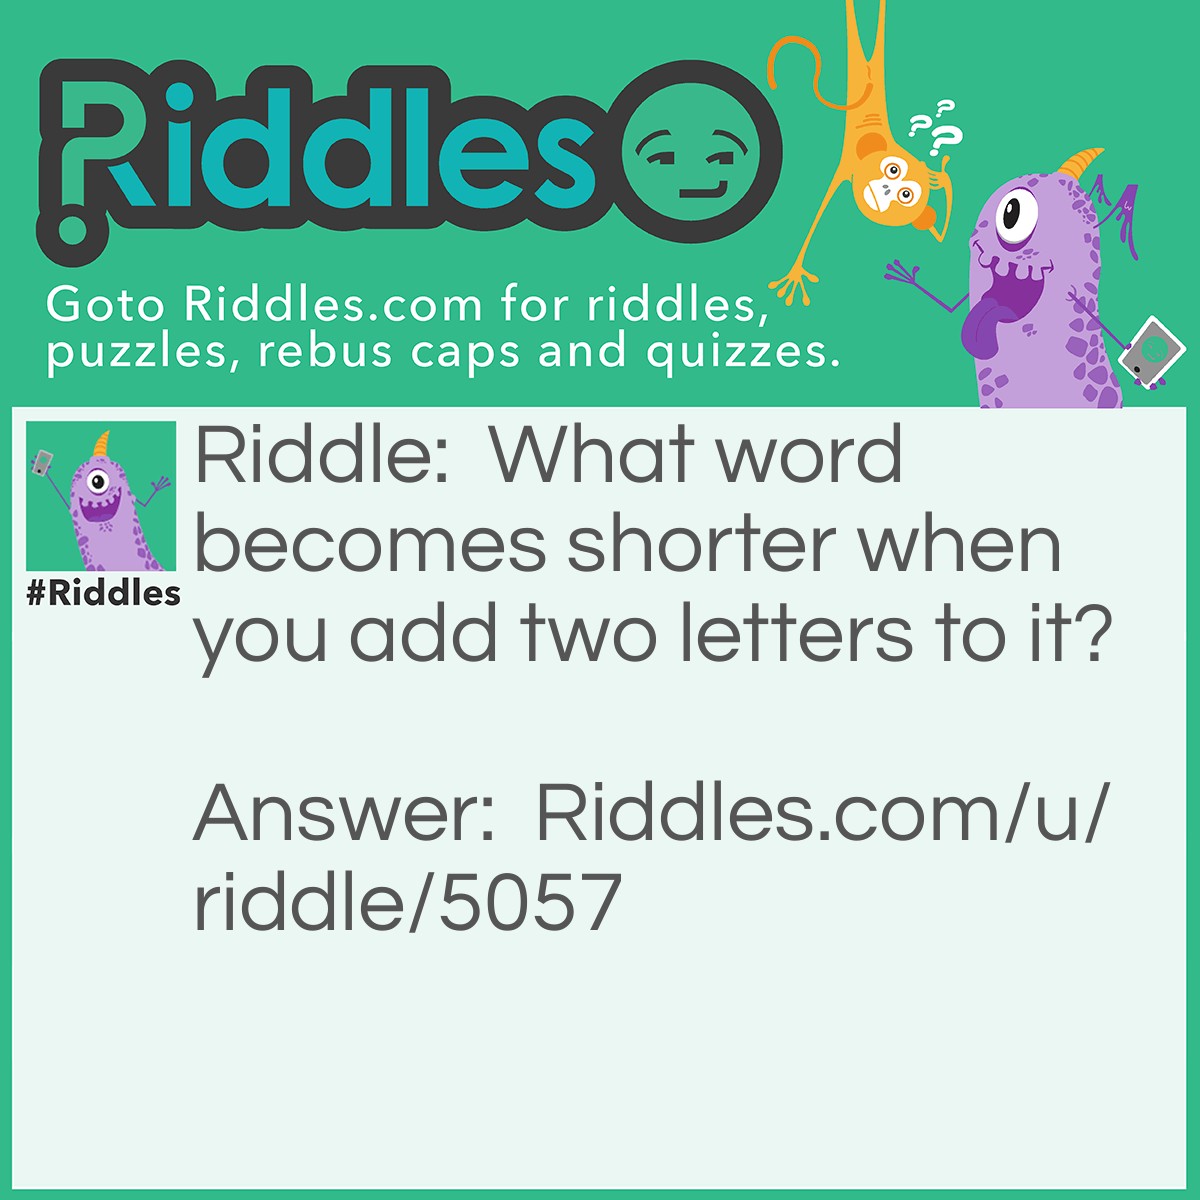 Riddle: What word becomes shorter when you add two letters to it? Answer: Short.